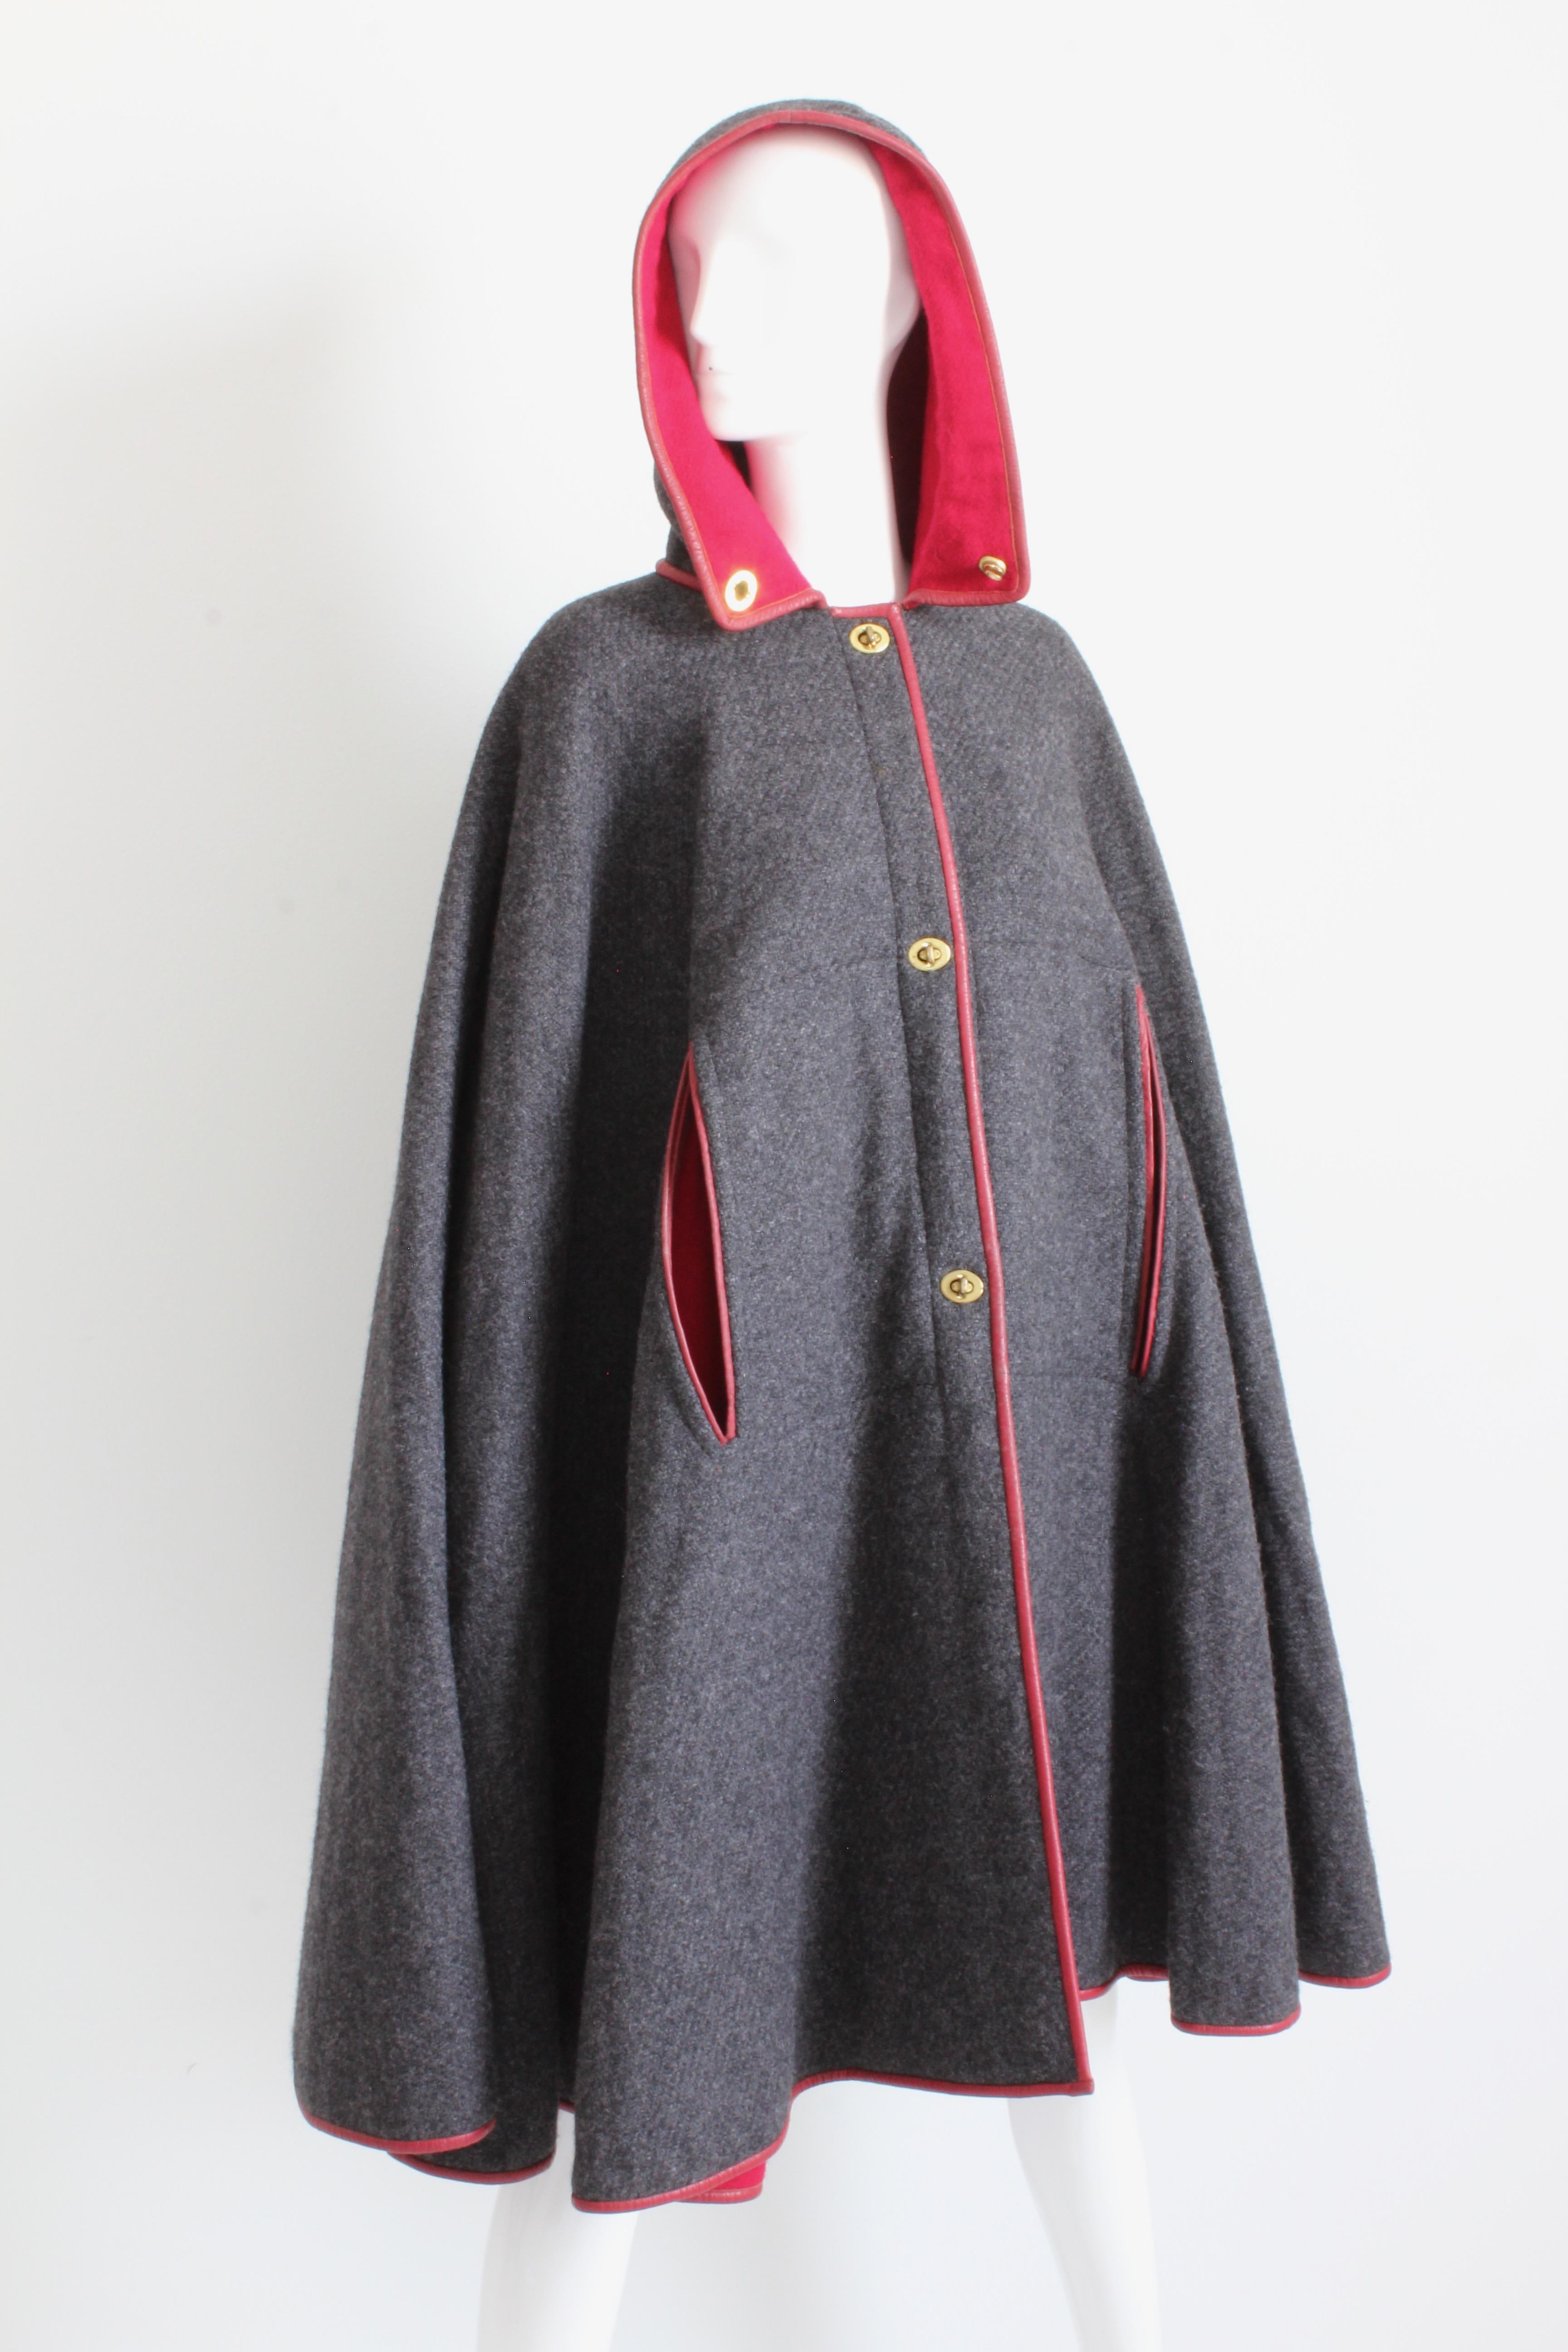 This fabulous hooded cape was designed by the mother of American sportswear, Bonnie Cashin, during her time at Sills. 

Made from a rich charcoal gray wool, this piece is fully lined in a vibrant cherry red wool jersey and features matching red